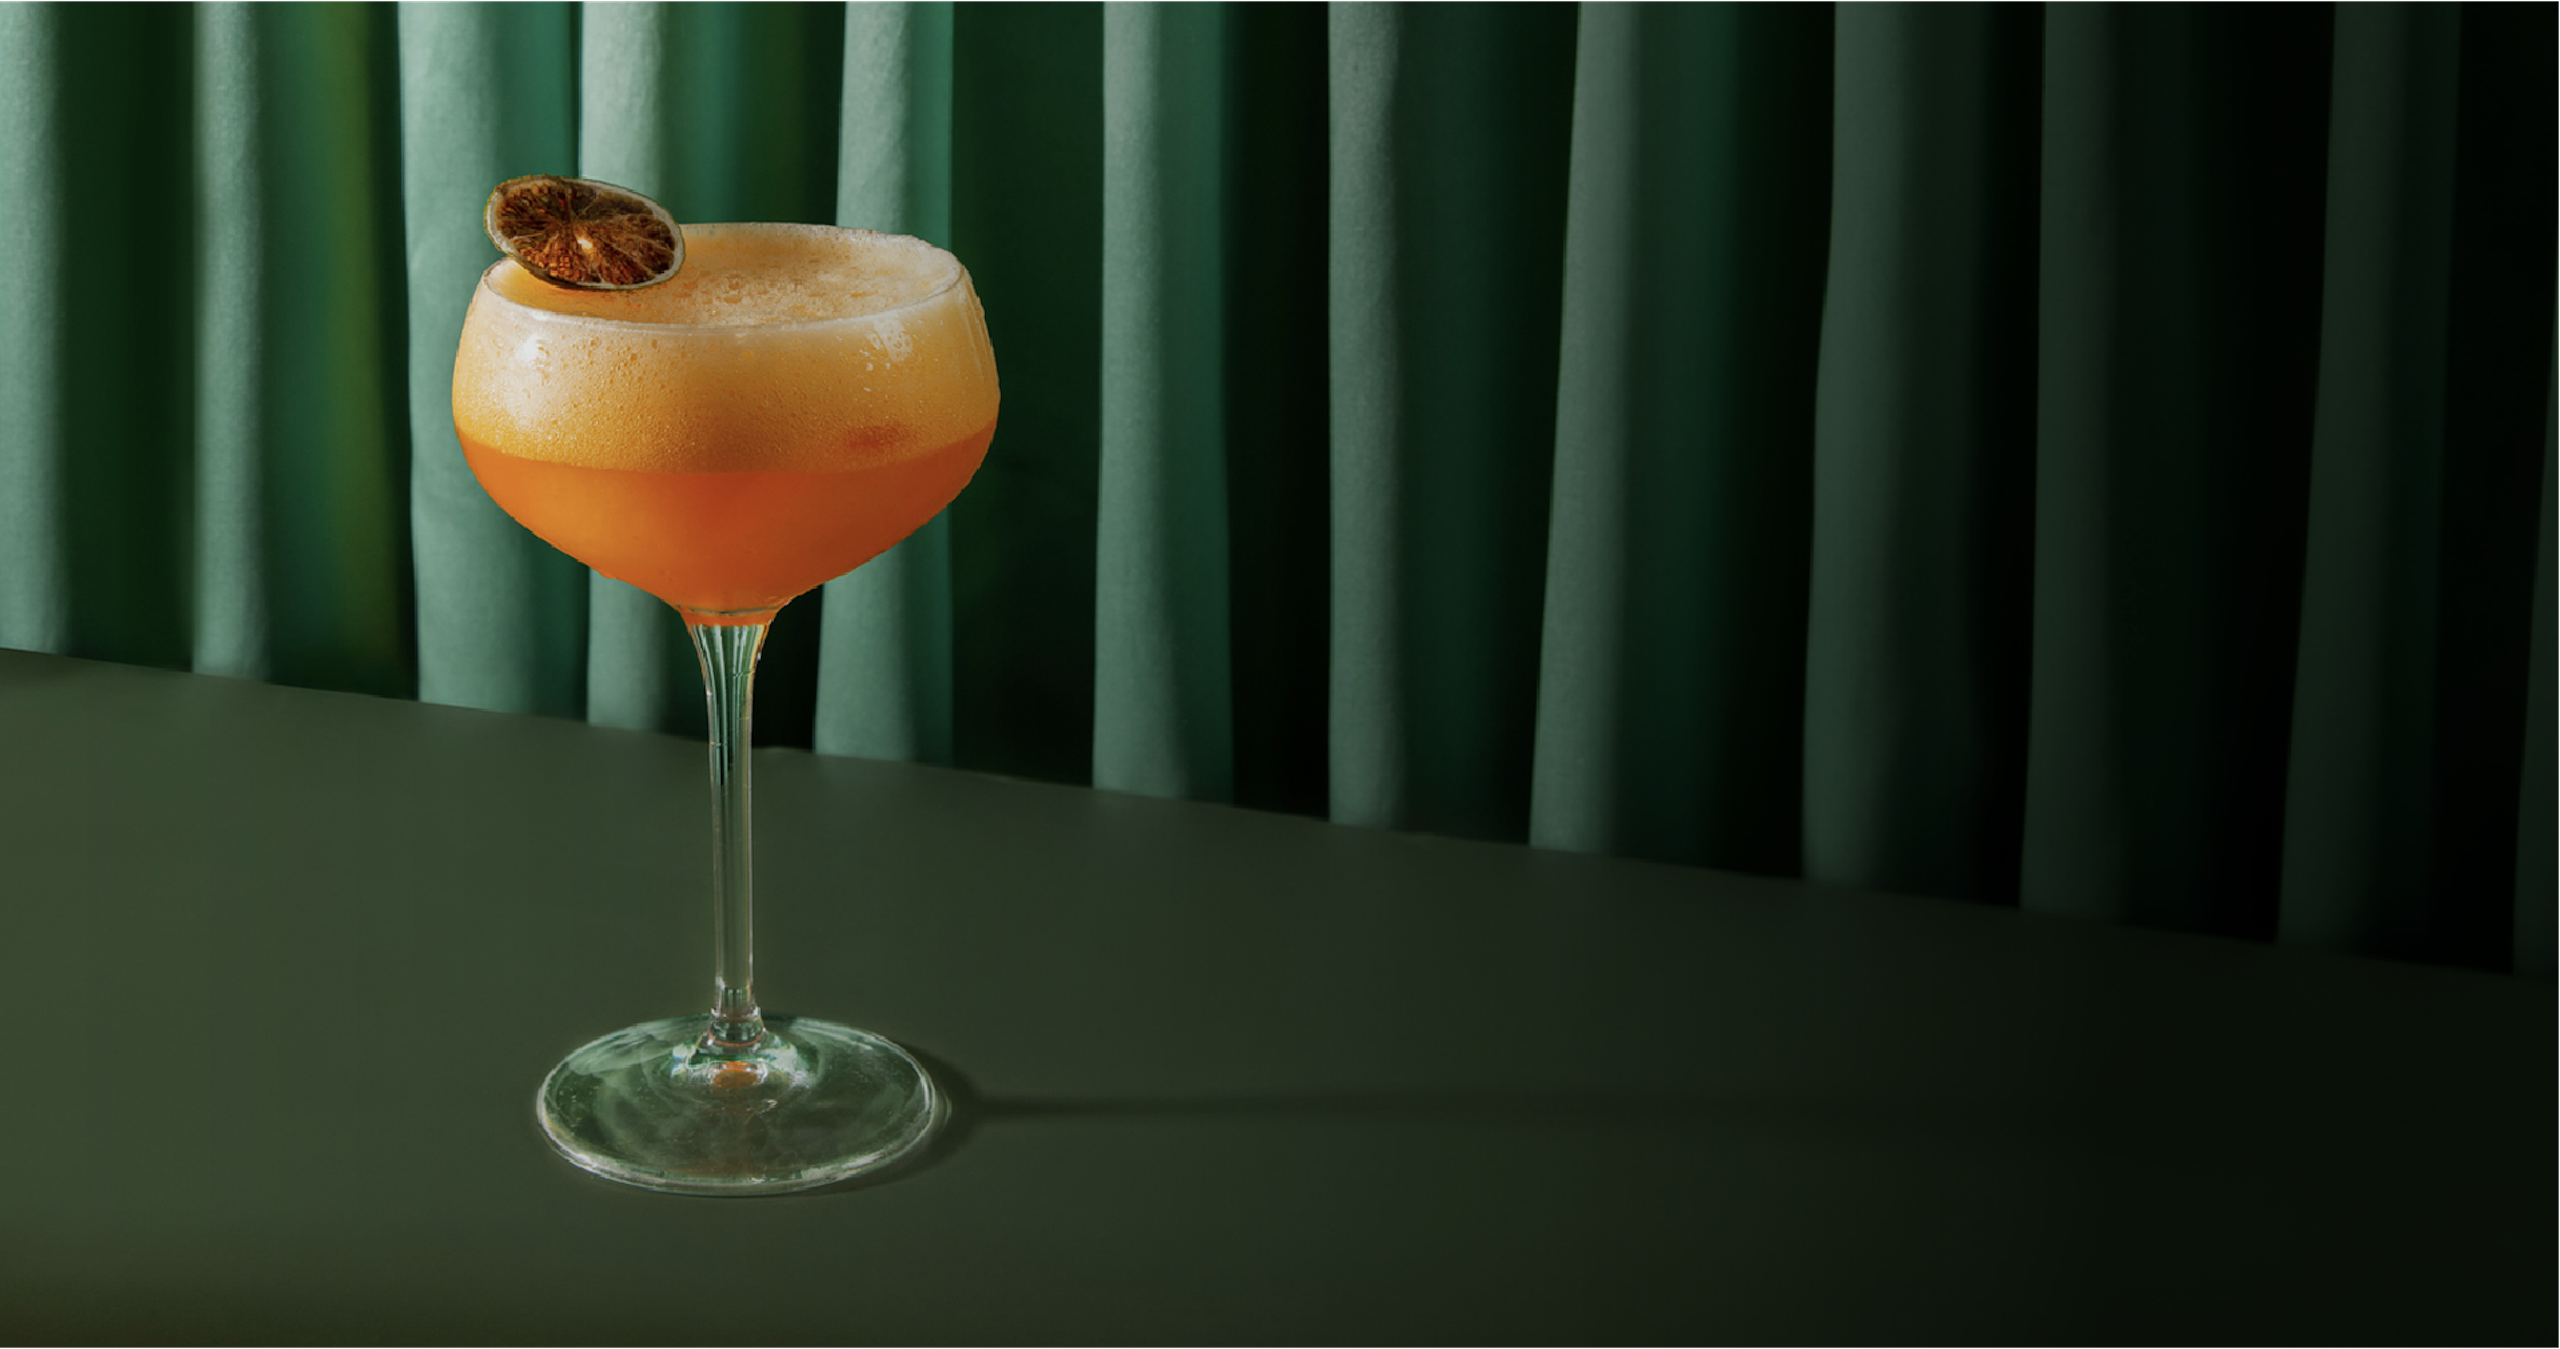 A beautiful orange coloured cocktail on a green table.